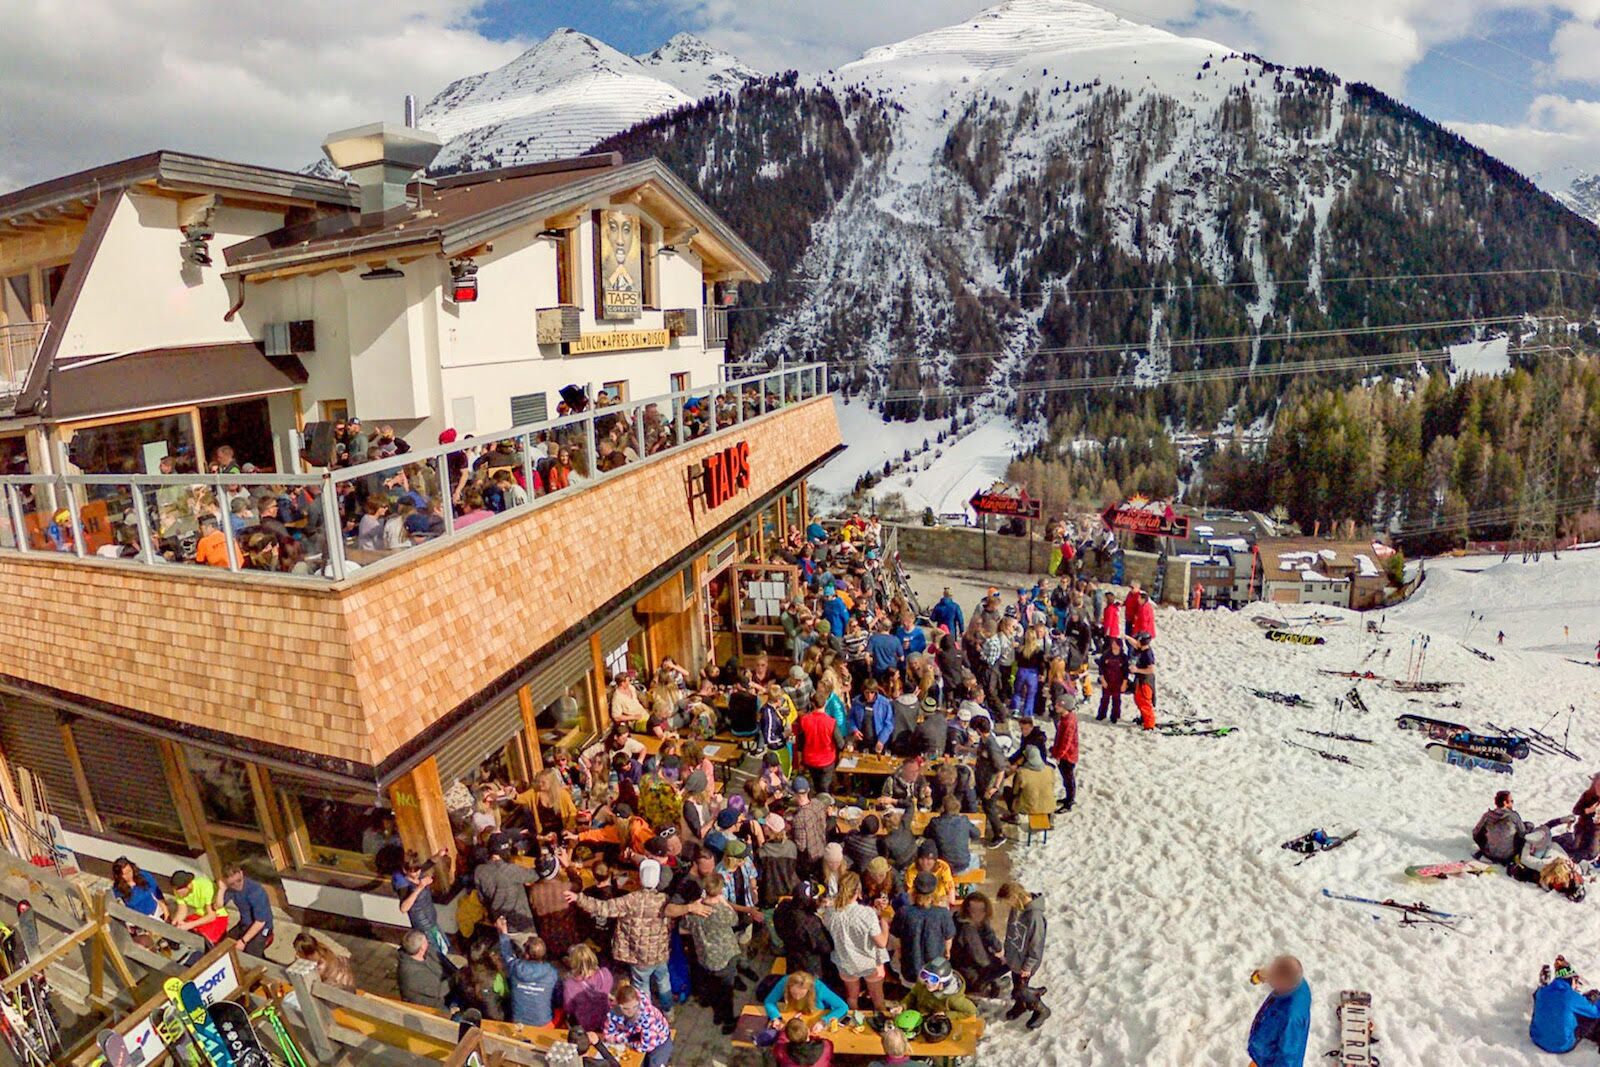 The party starts every afternoon outside Taps in St. Anton, Austria